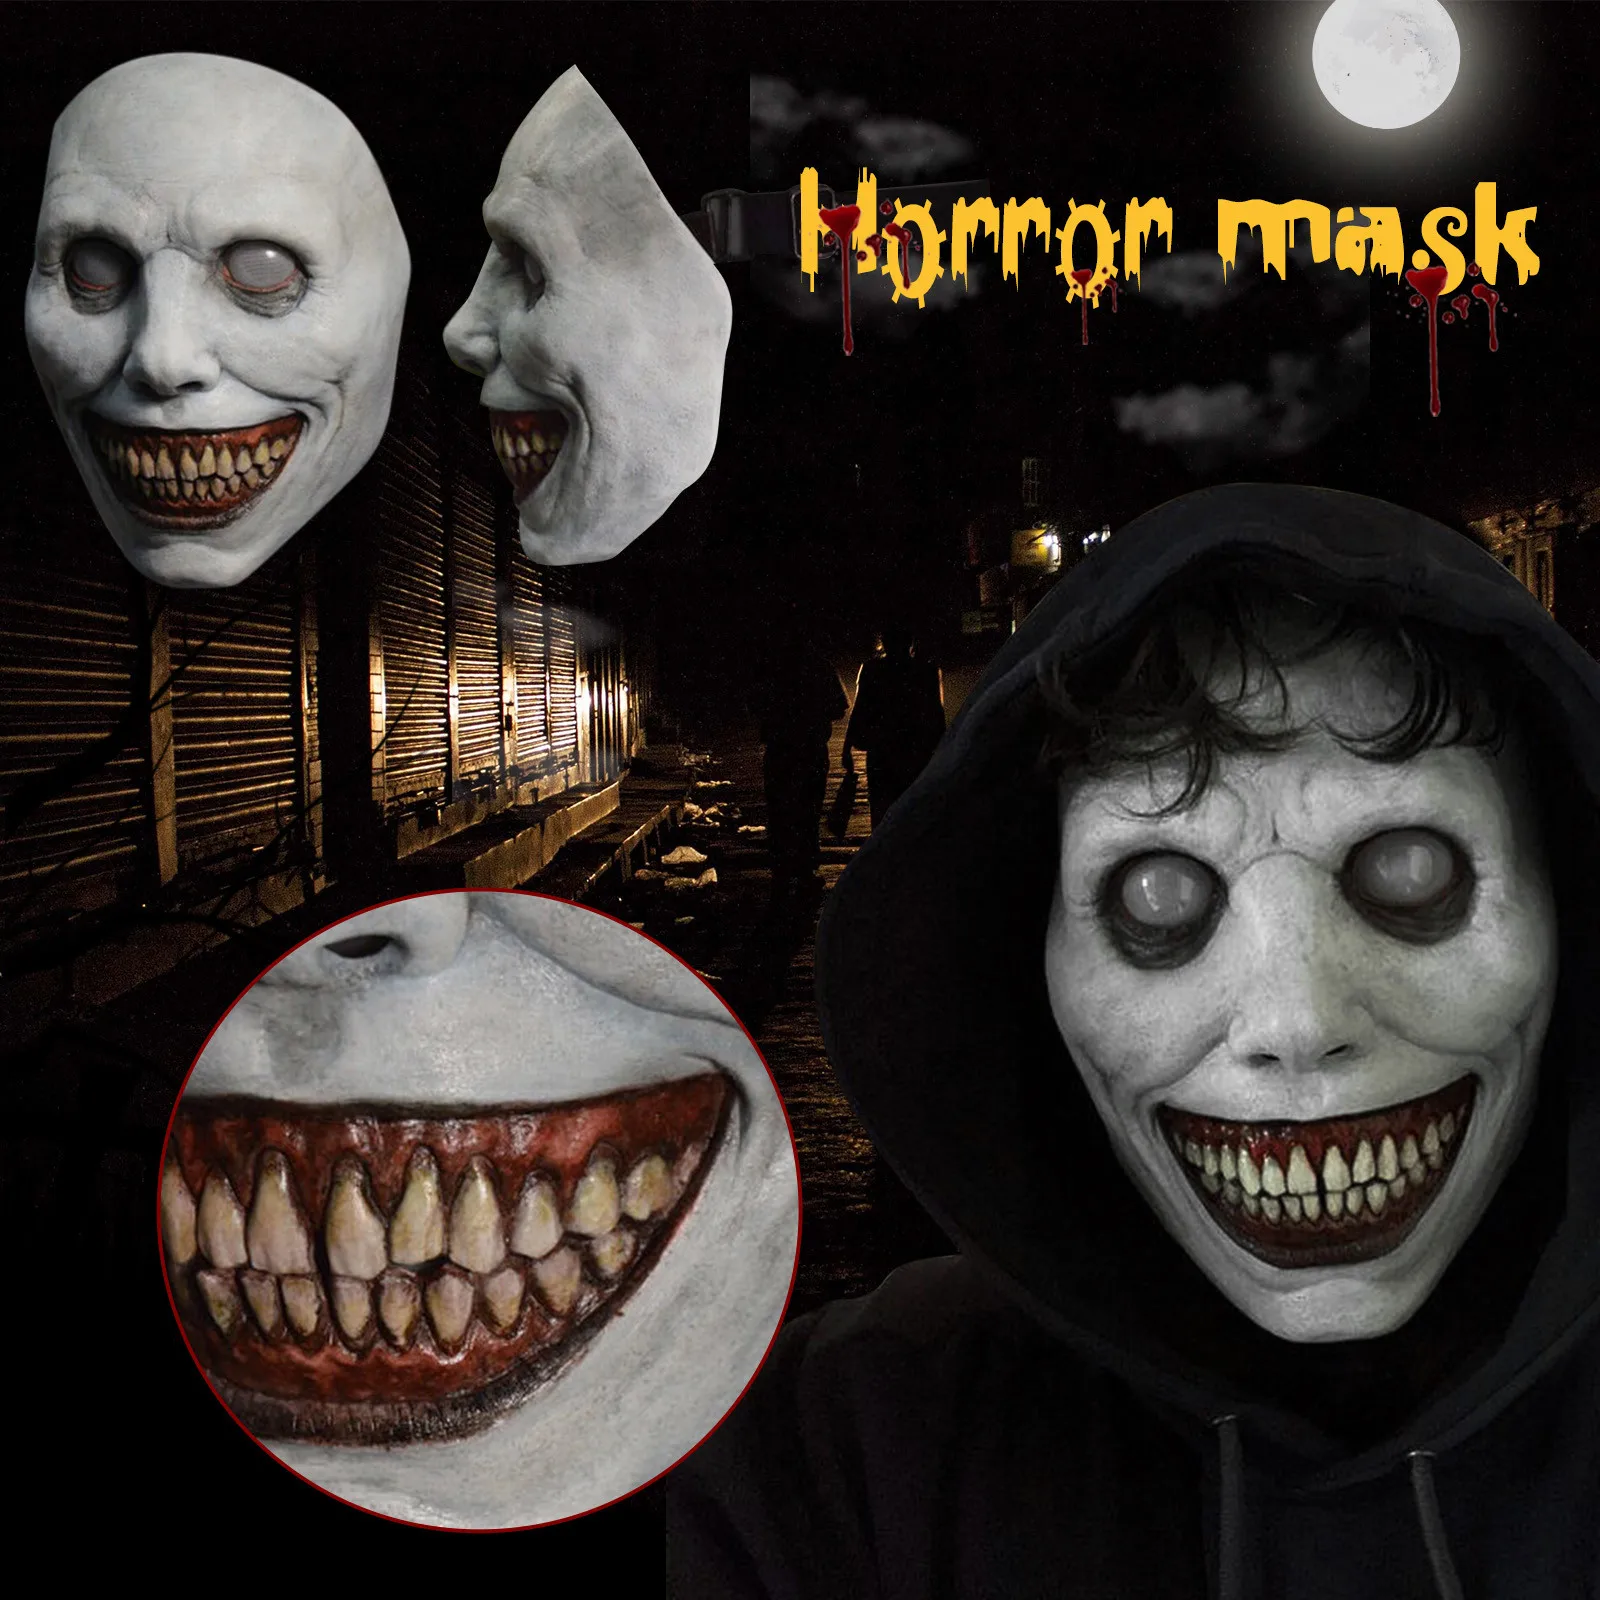 

Creepy Halloween Mask Smiling Demons Horror Face Masks The Evil Cosplay Props Headwear Dress Up Party Clothing Accessories Gifts